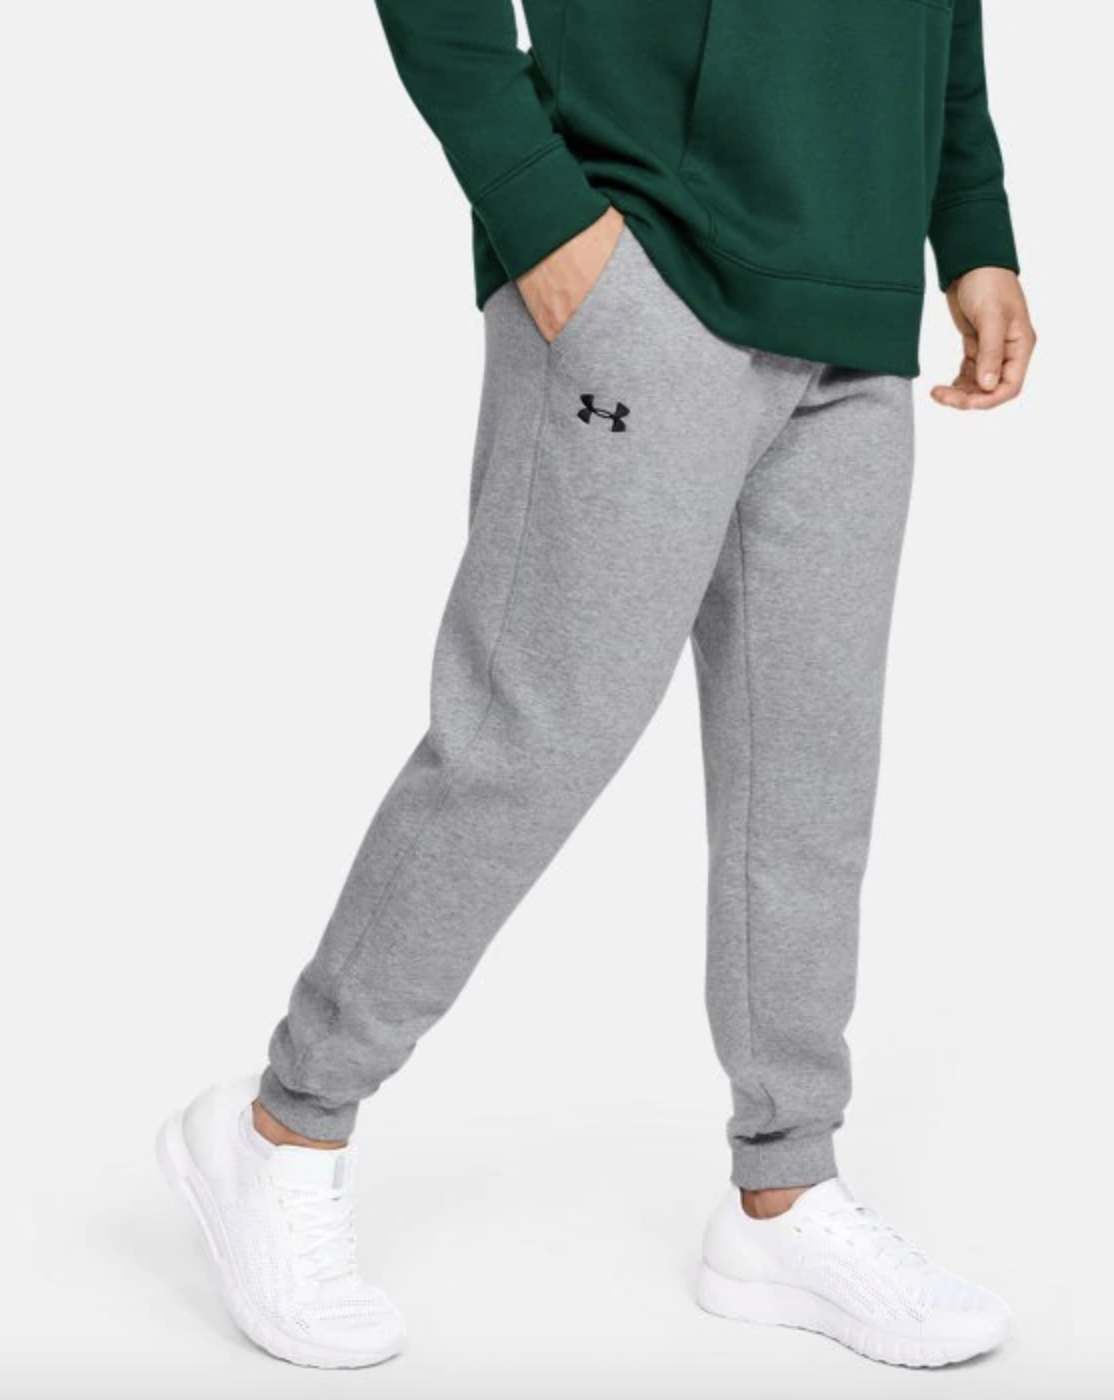 Model wearing the light gray joggers